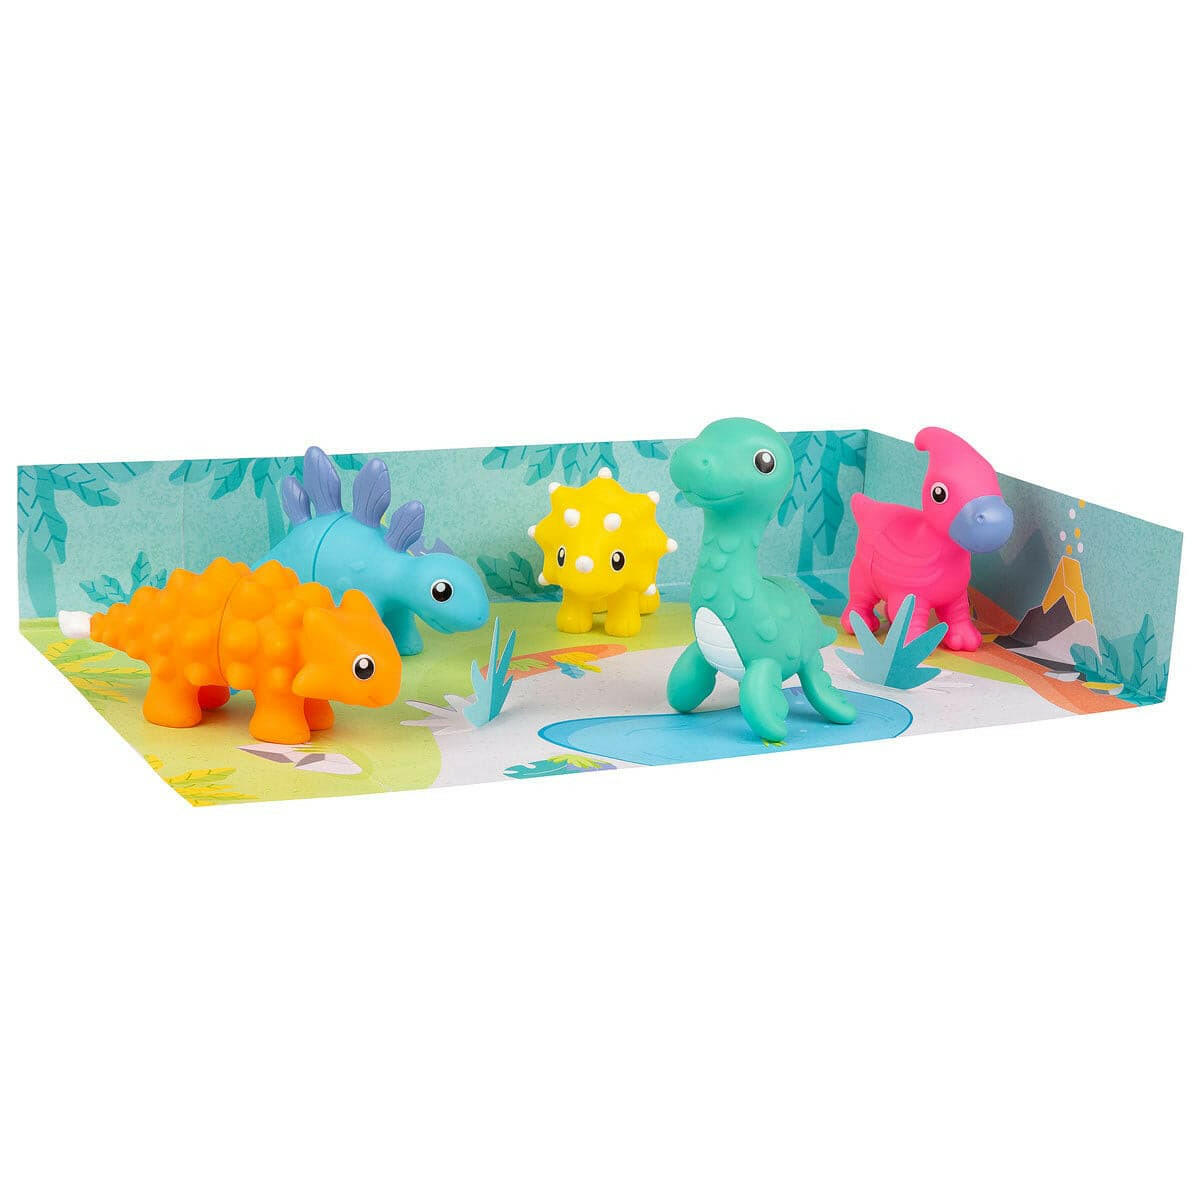 Playgro Build and Play Mix N Match Dinosaurs.